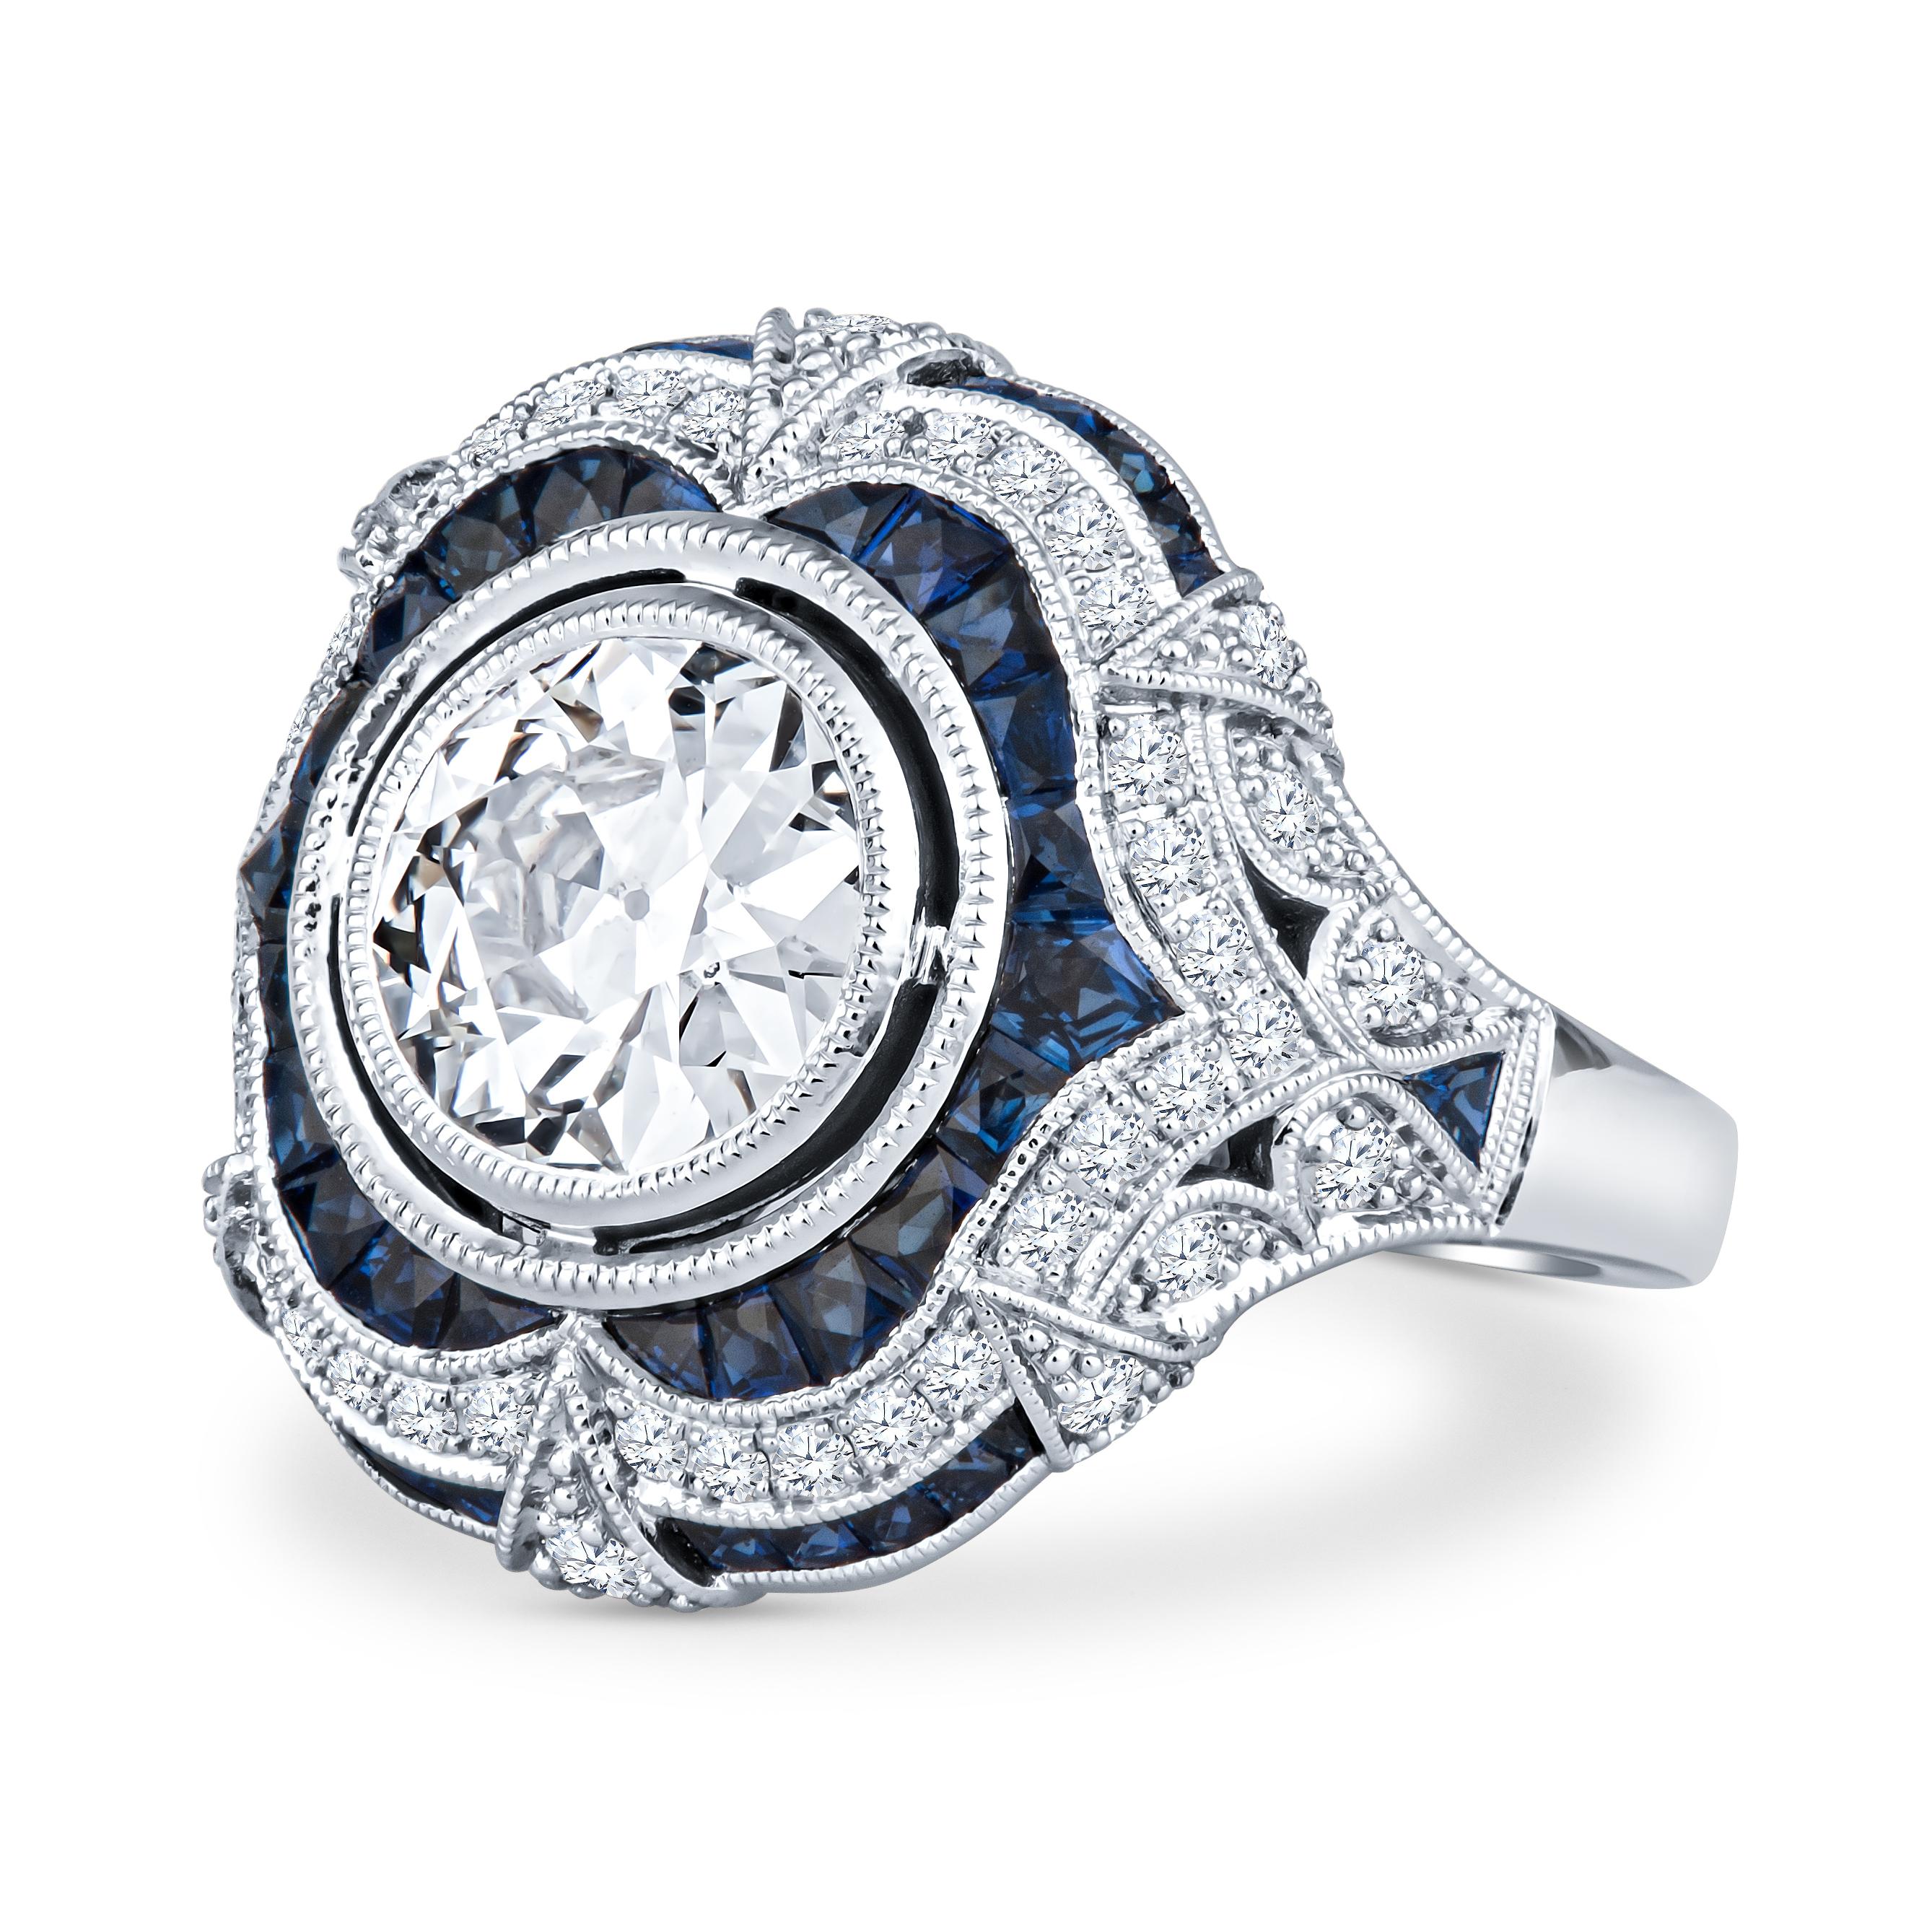 This exquisite Shaftel Diamonds 1.81ct Old European cut diamond (L SI1, GIA certified, GIA Report Number: 5201539315) is complemented by 1.21ct total weight in natural blue sapphires adorning the ring, alongside 0.42ct total weight in side diamonds.